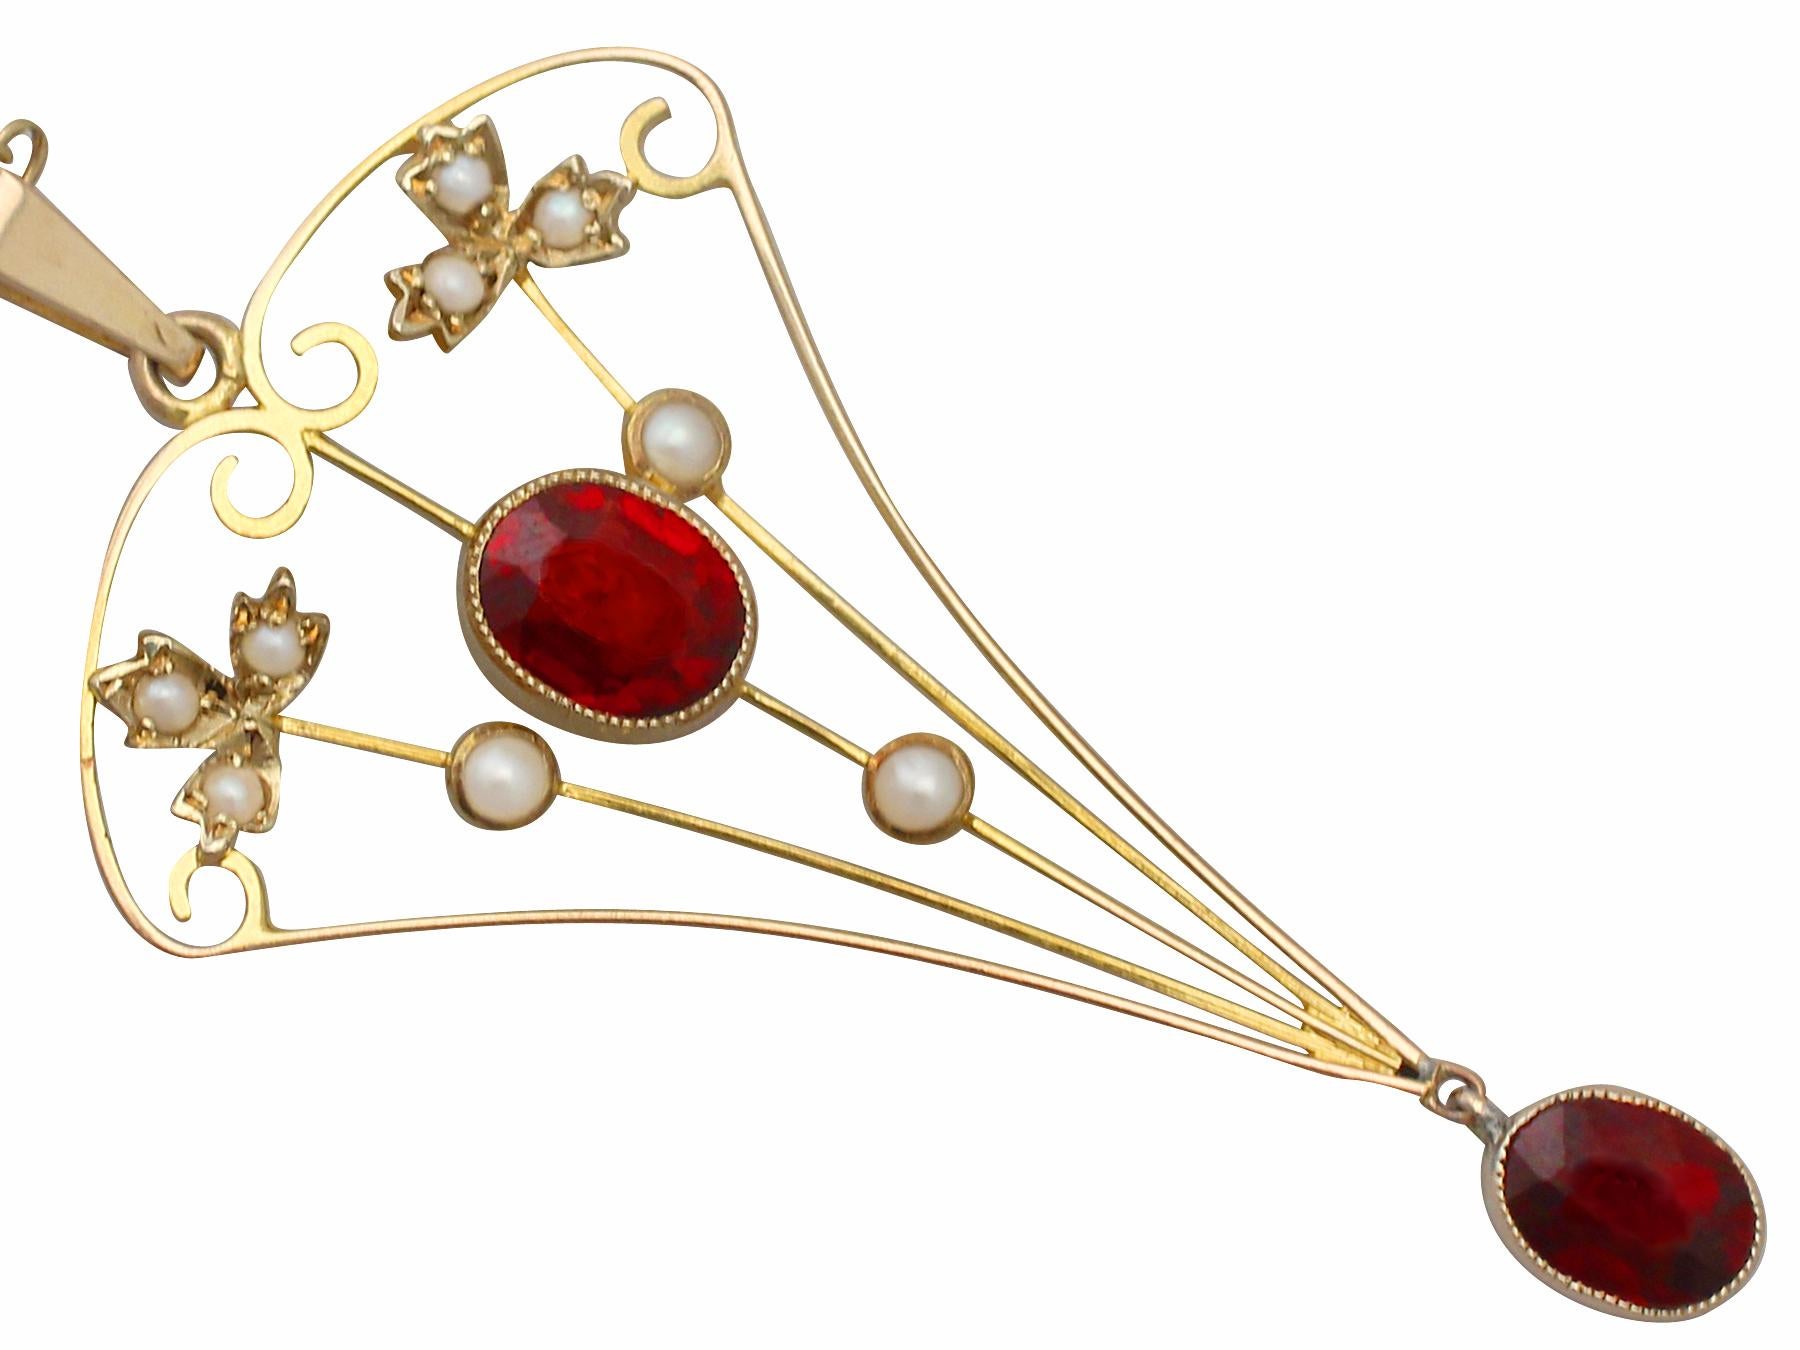 Antique 1920s 1.02 Carat Garnet and Seed Pearl Yellow Gold Pendant In Excellent Condition For Sale In Jesmond, Newcastle Upon Tyne